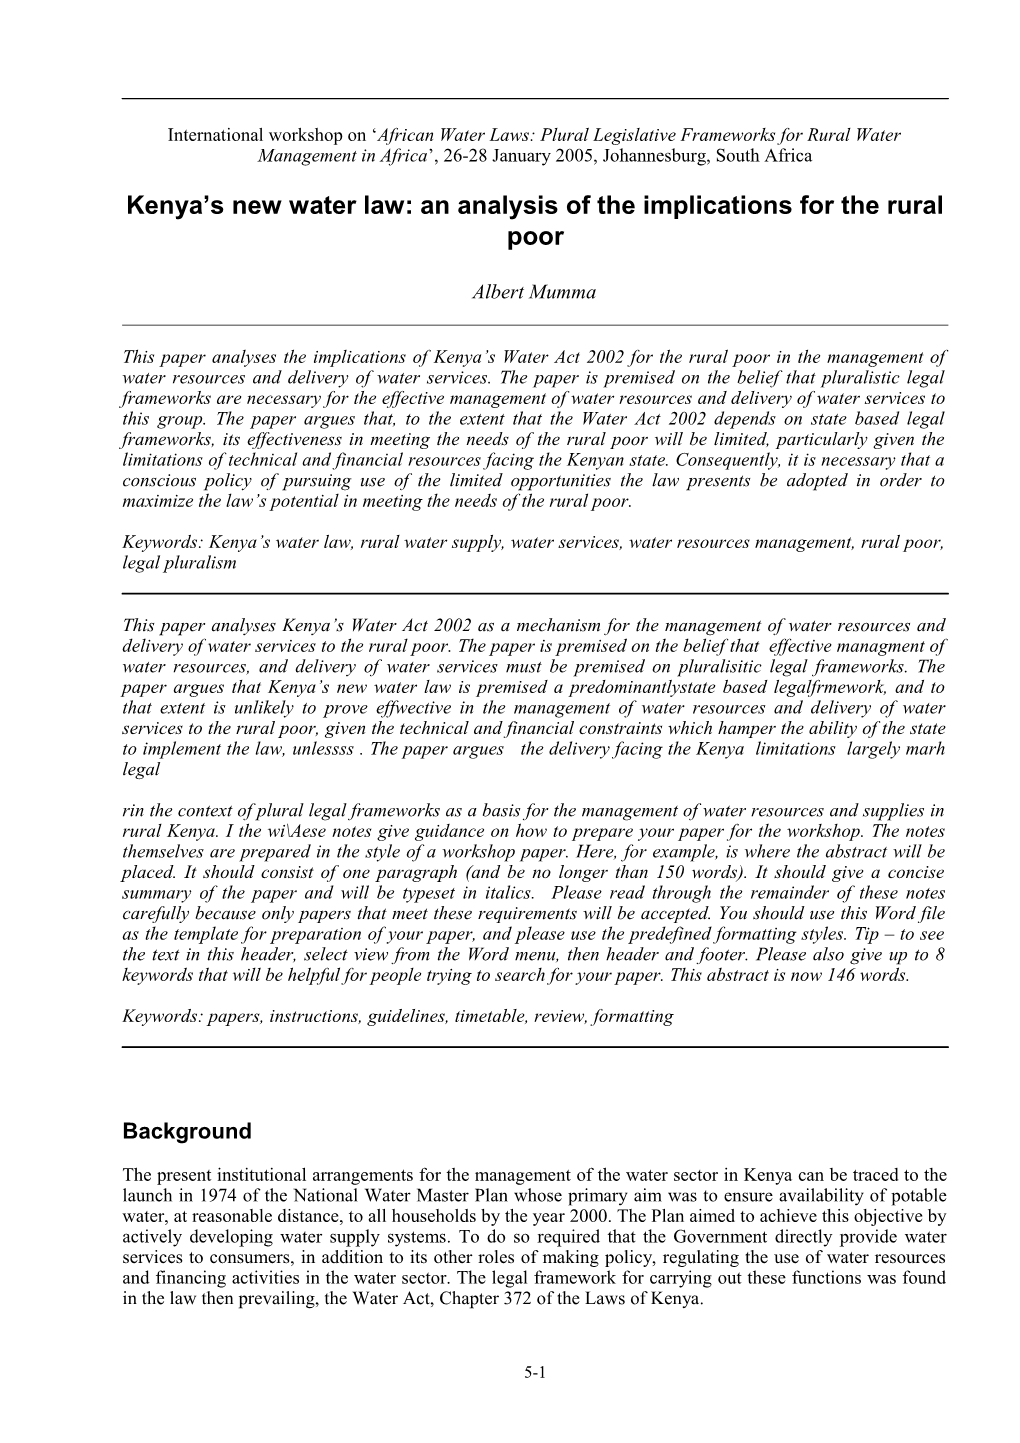 The Present Institutional Arrangements for the Management of the Water Sector in Kenya